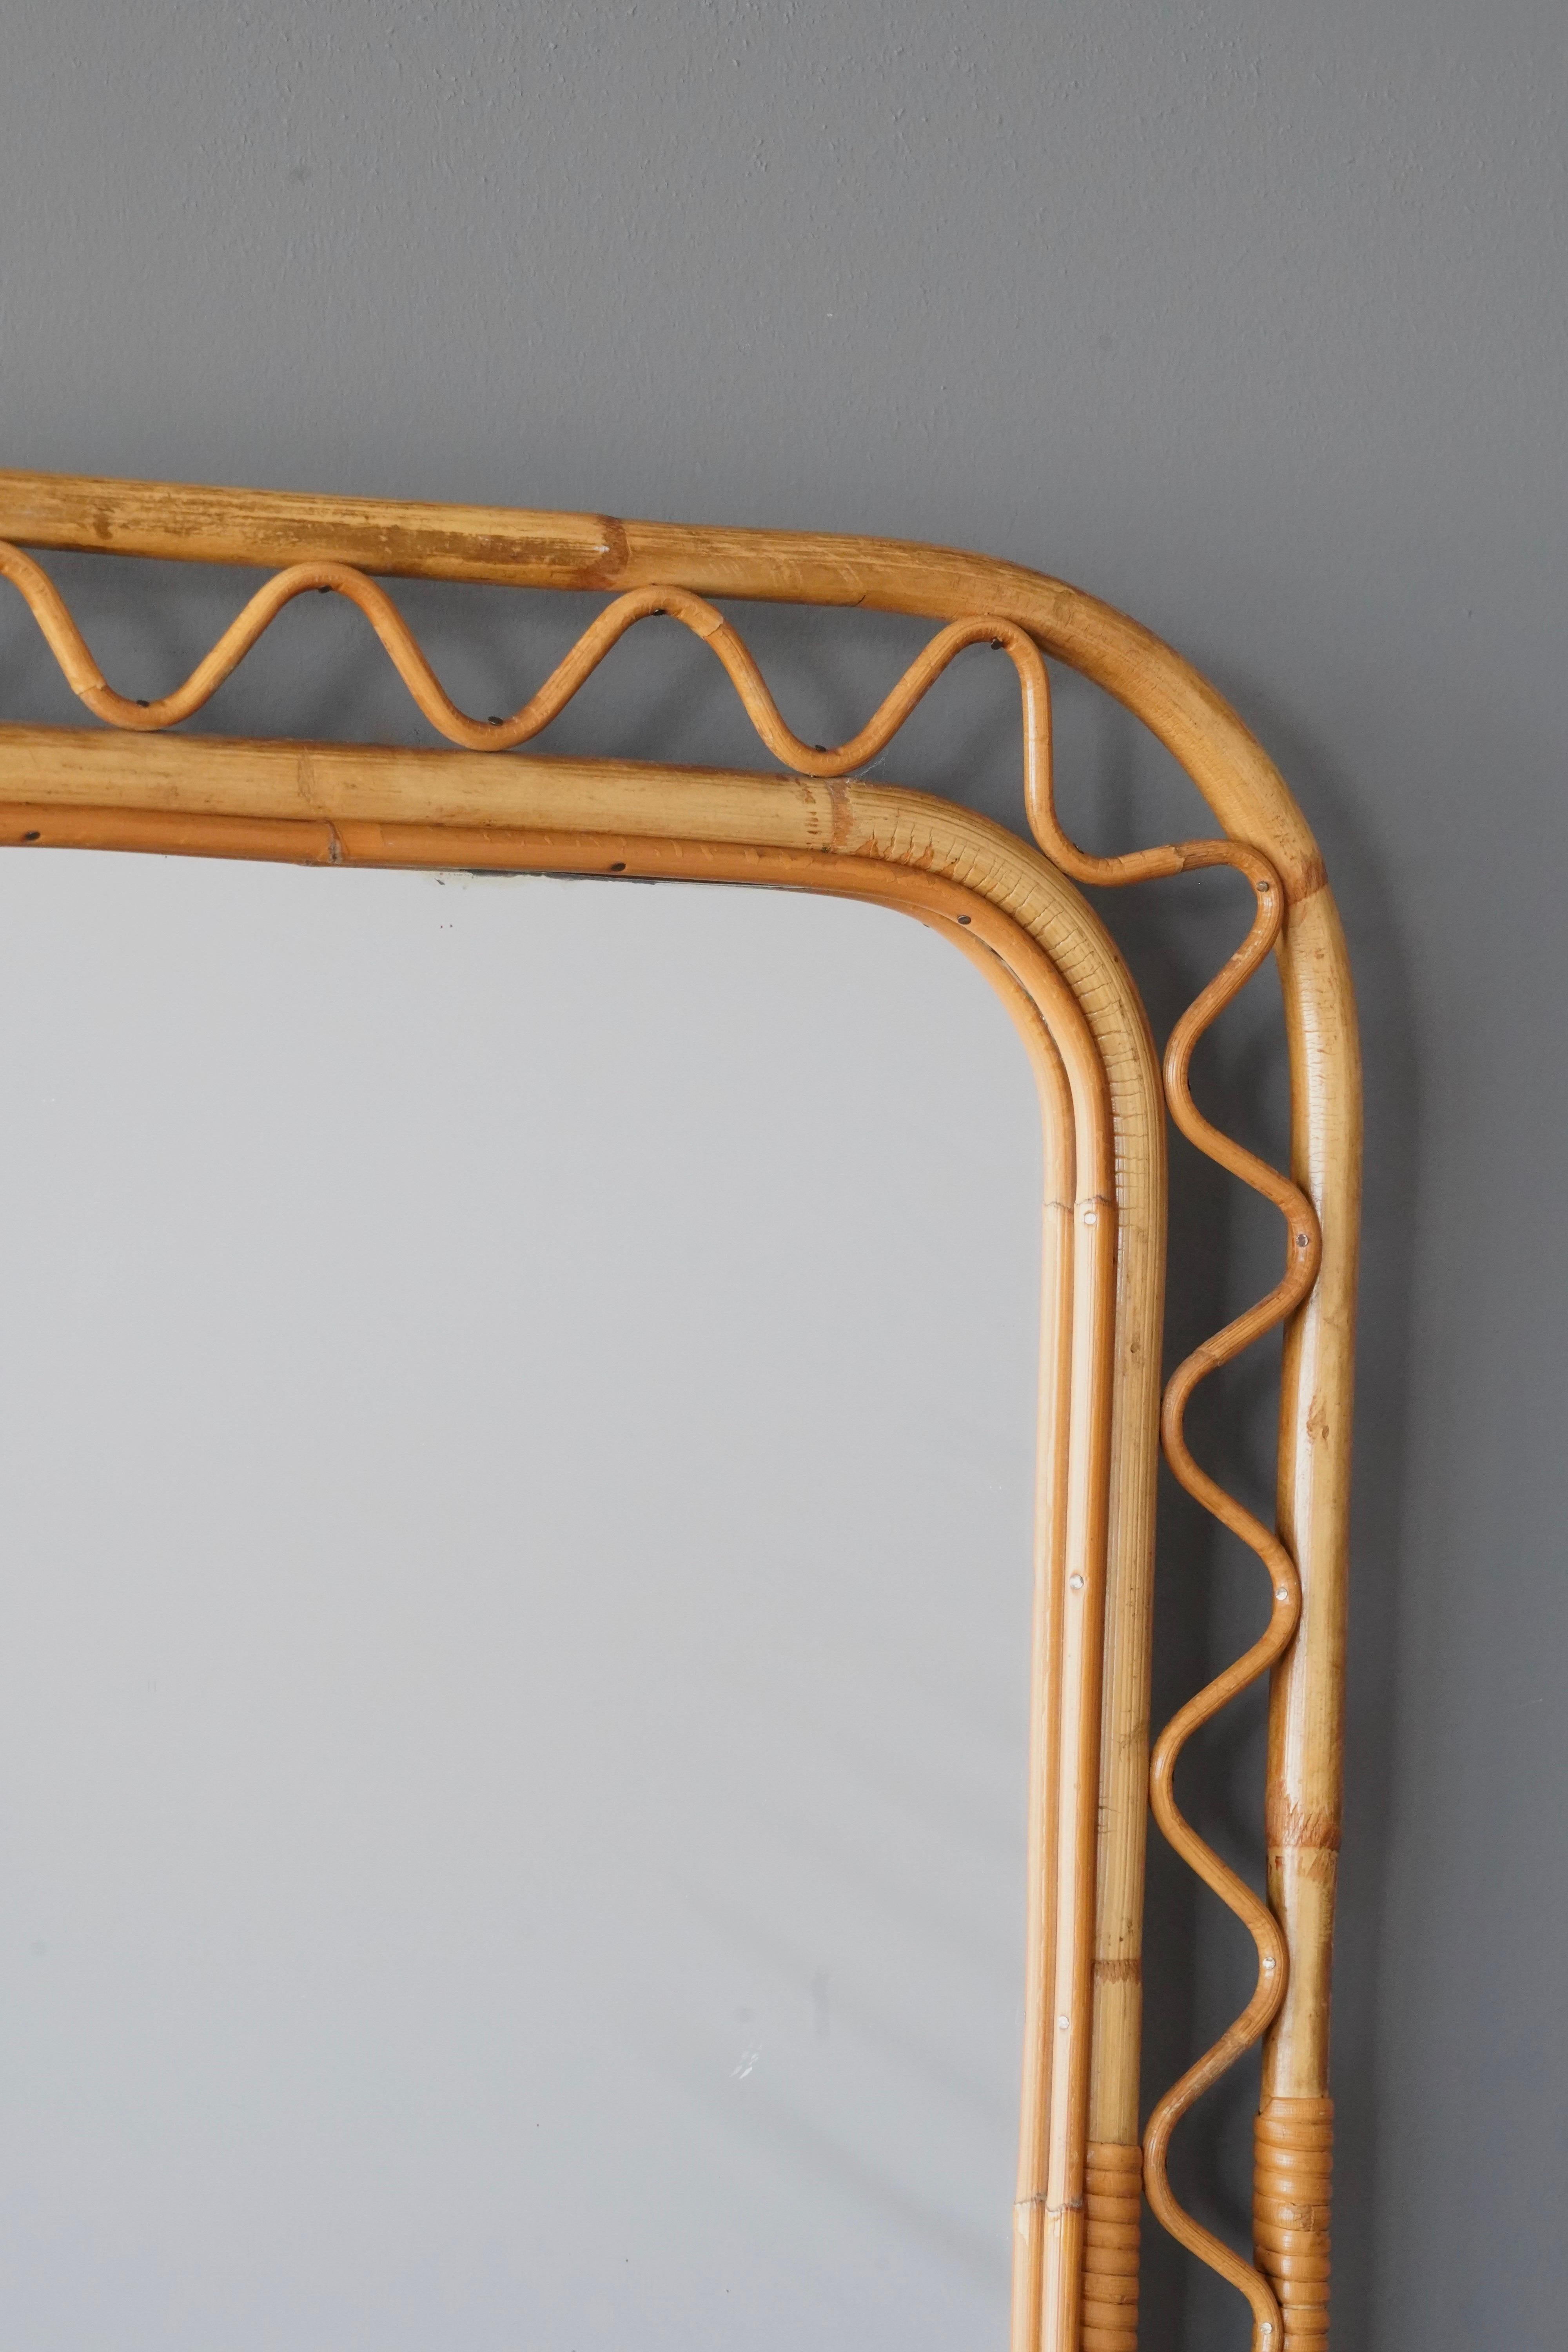 An organic mirror, of unknown Swedish production. Similar mirrors retailed by Svenskt Tenn, the iconic Swedish firm founded by Estrid Ericson and creatively led by Josef Frank. 

In finely braided wicker / rattan / cane and bambo.

Other